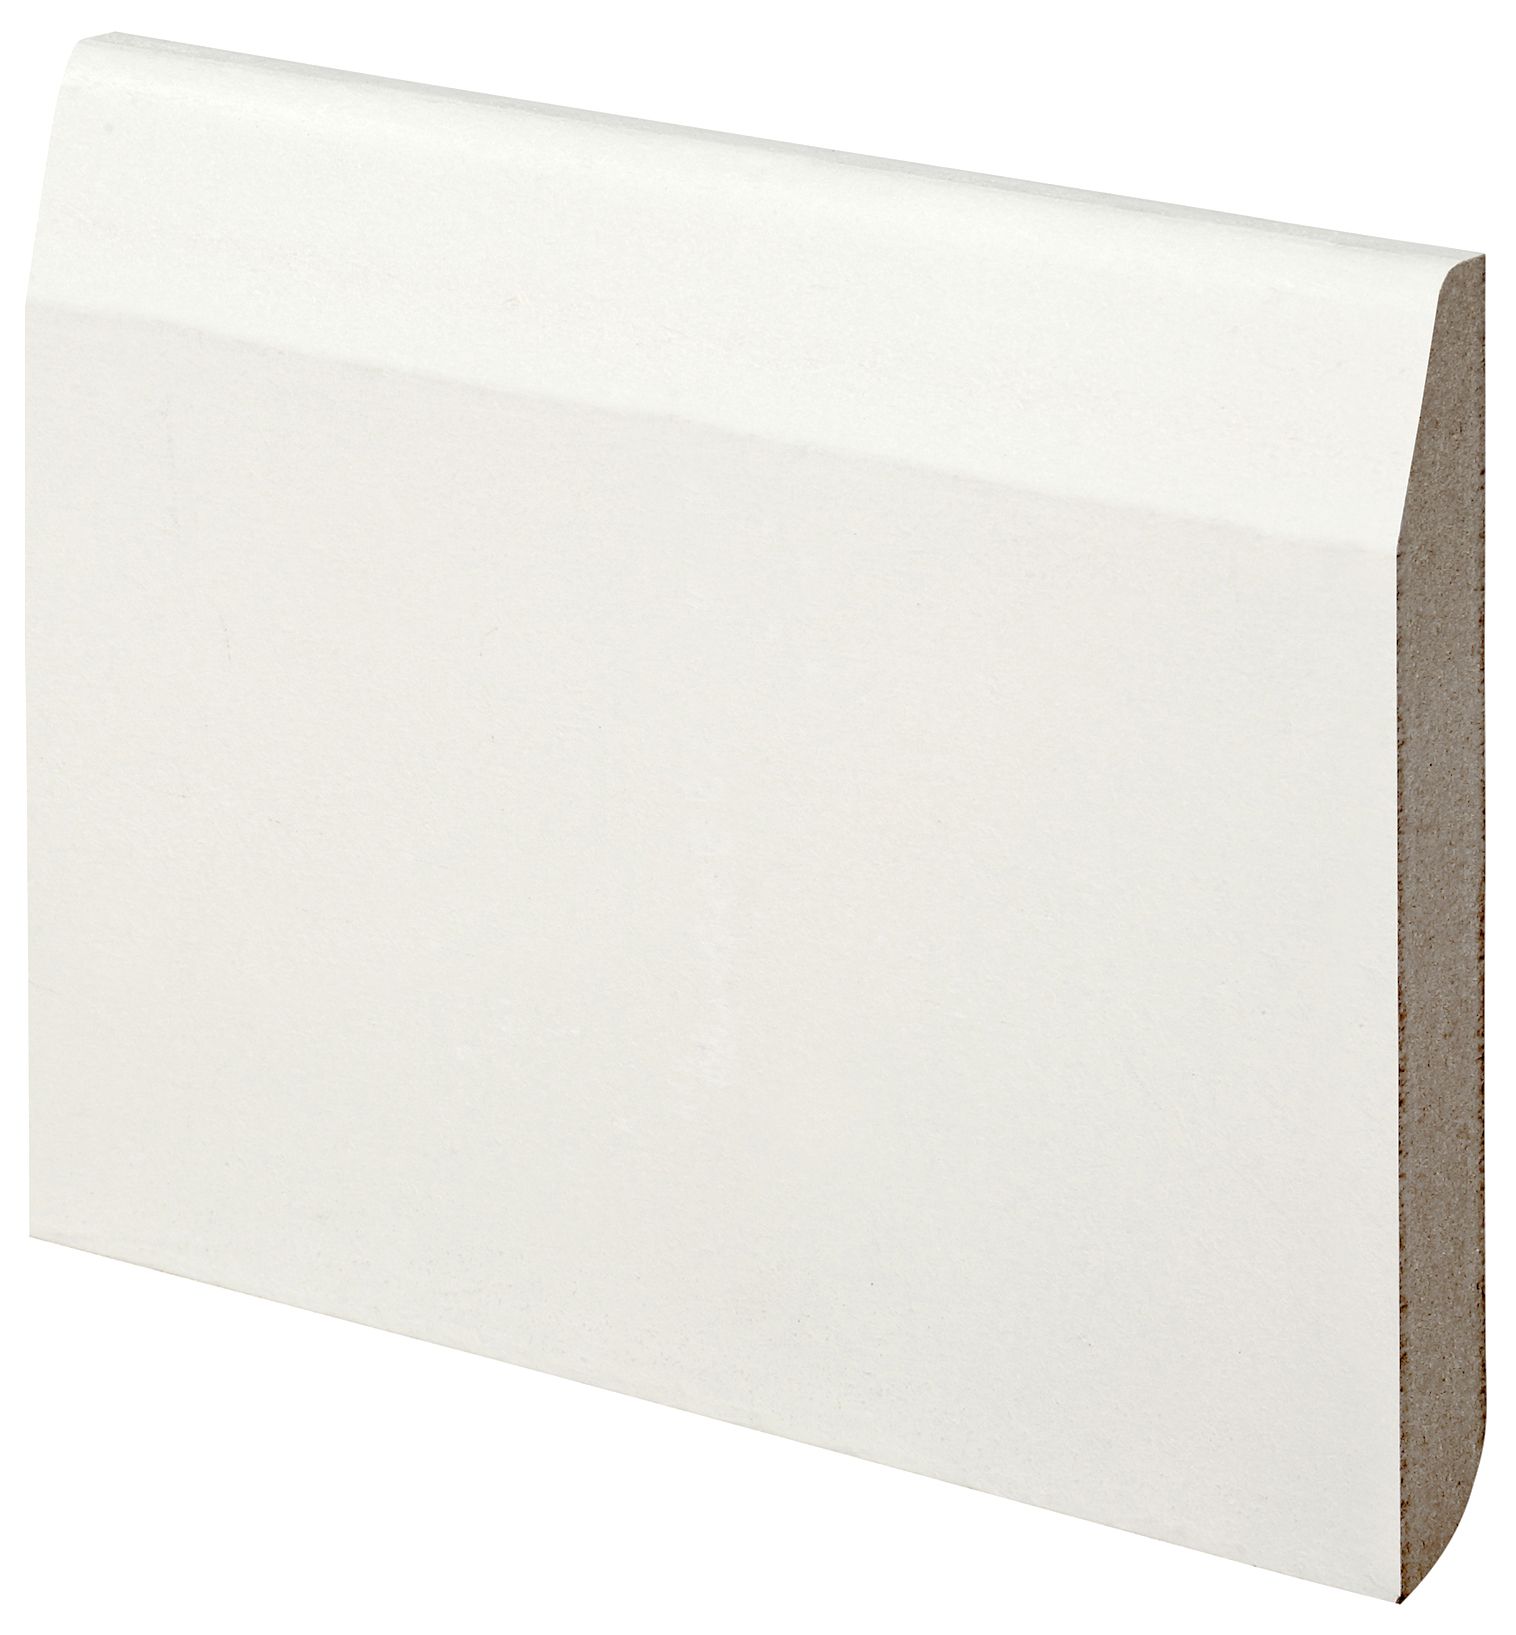 Image of Wickes Dual Purpose Chamfered/Bullnose Primed MDF Skirting - 18 x 119 x 2400mm